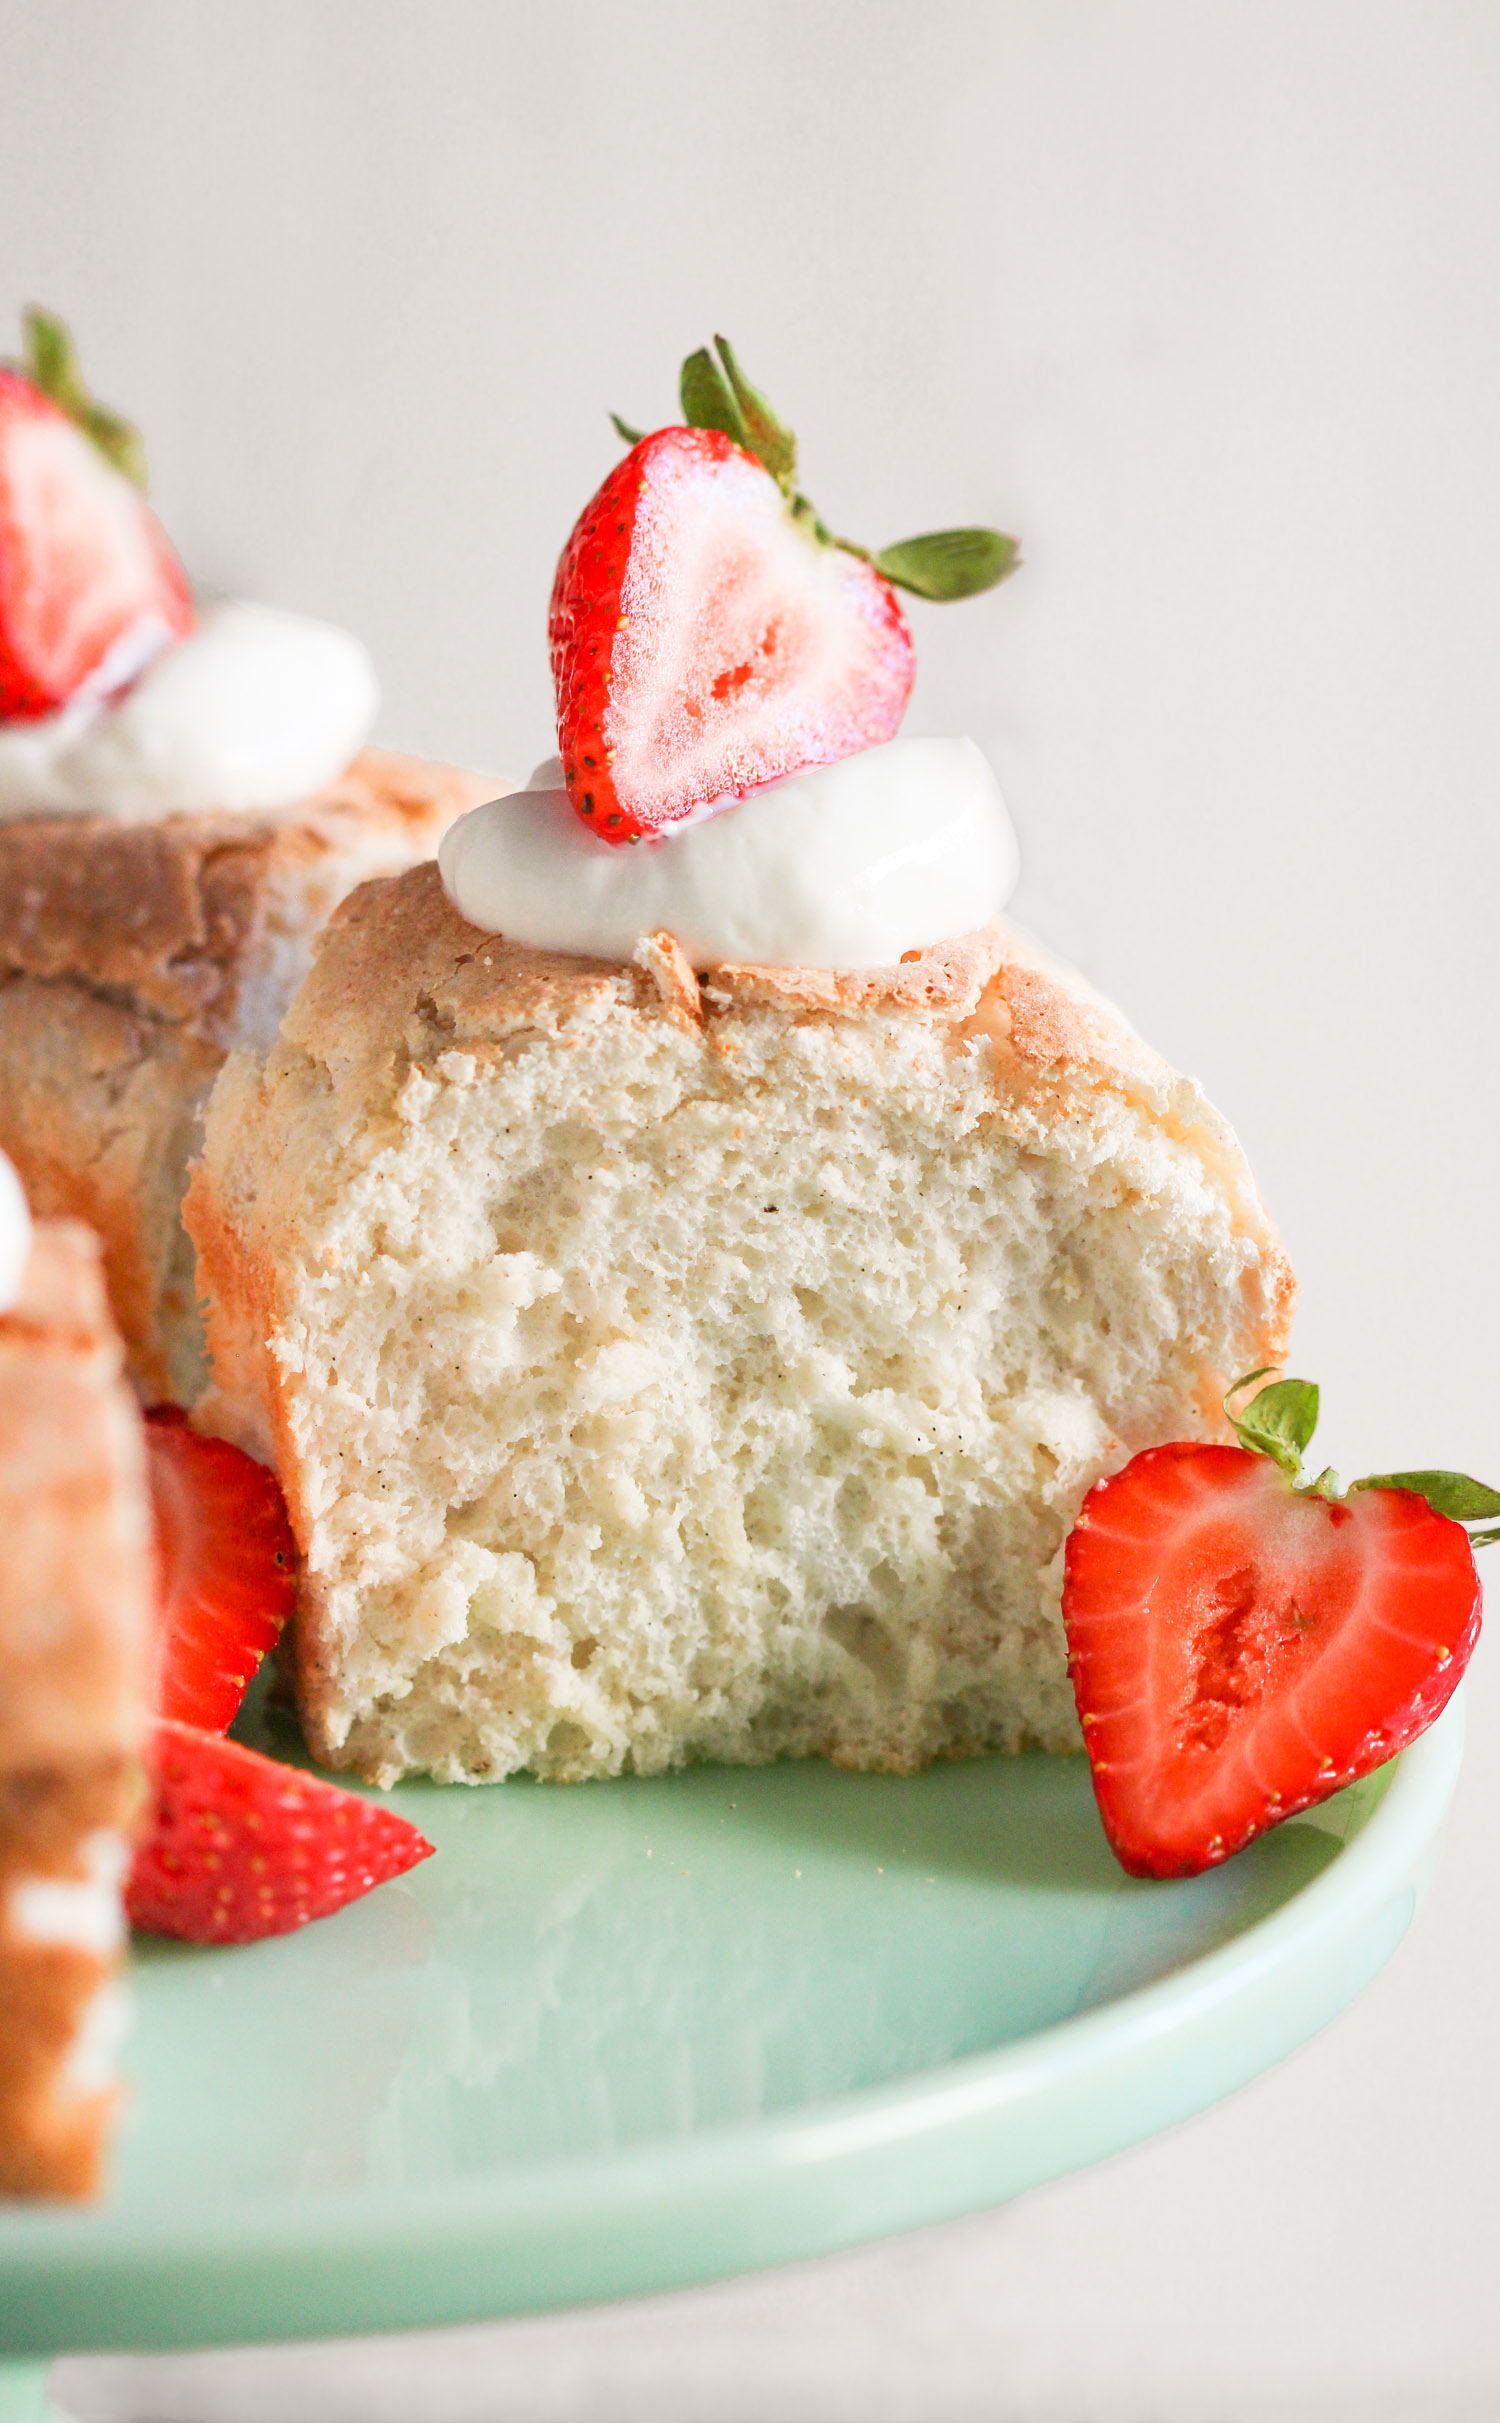 Healthy Angel Food Cake Recipe | Only 95 calories, sugar free, gluten free